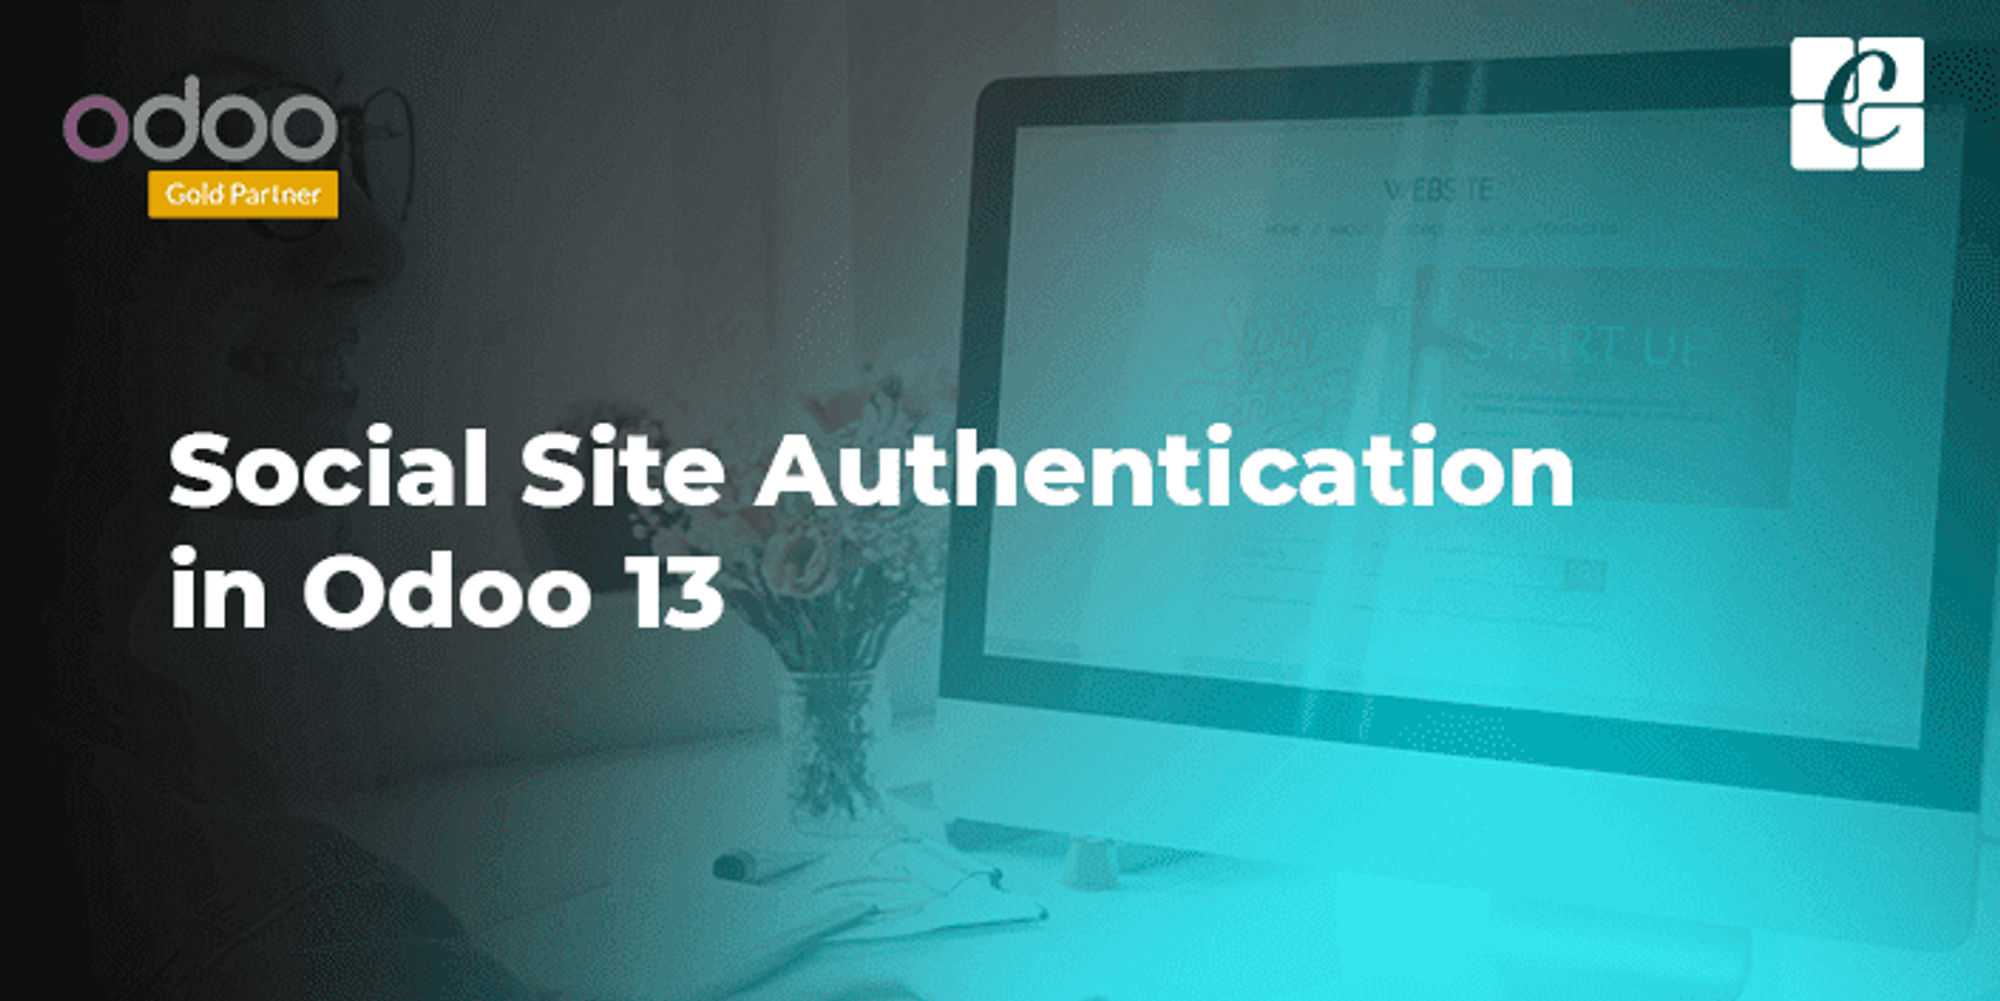 Social Site Authentication in Odoo 13